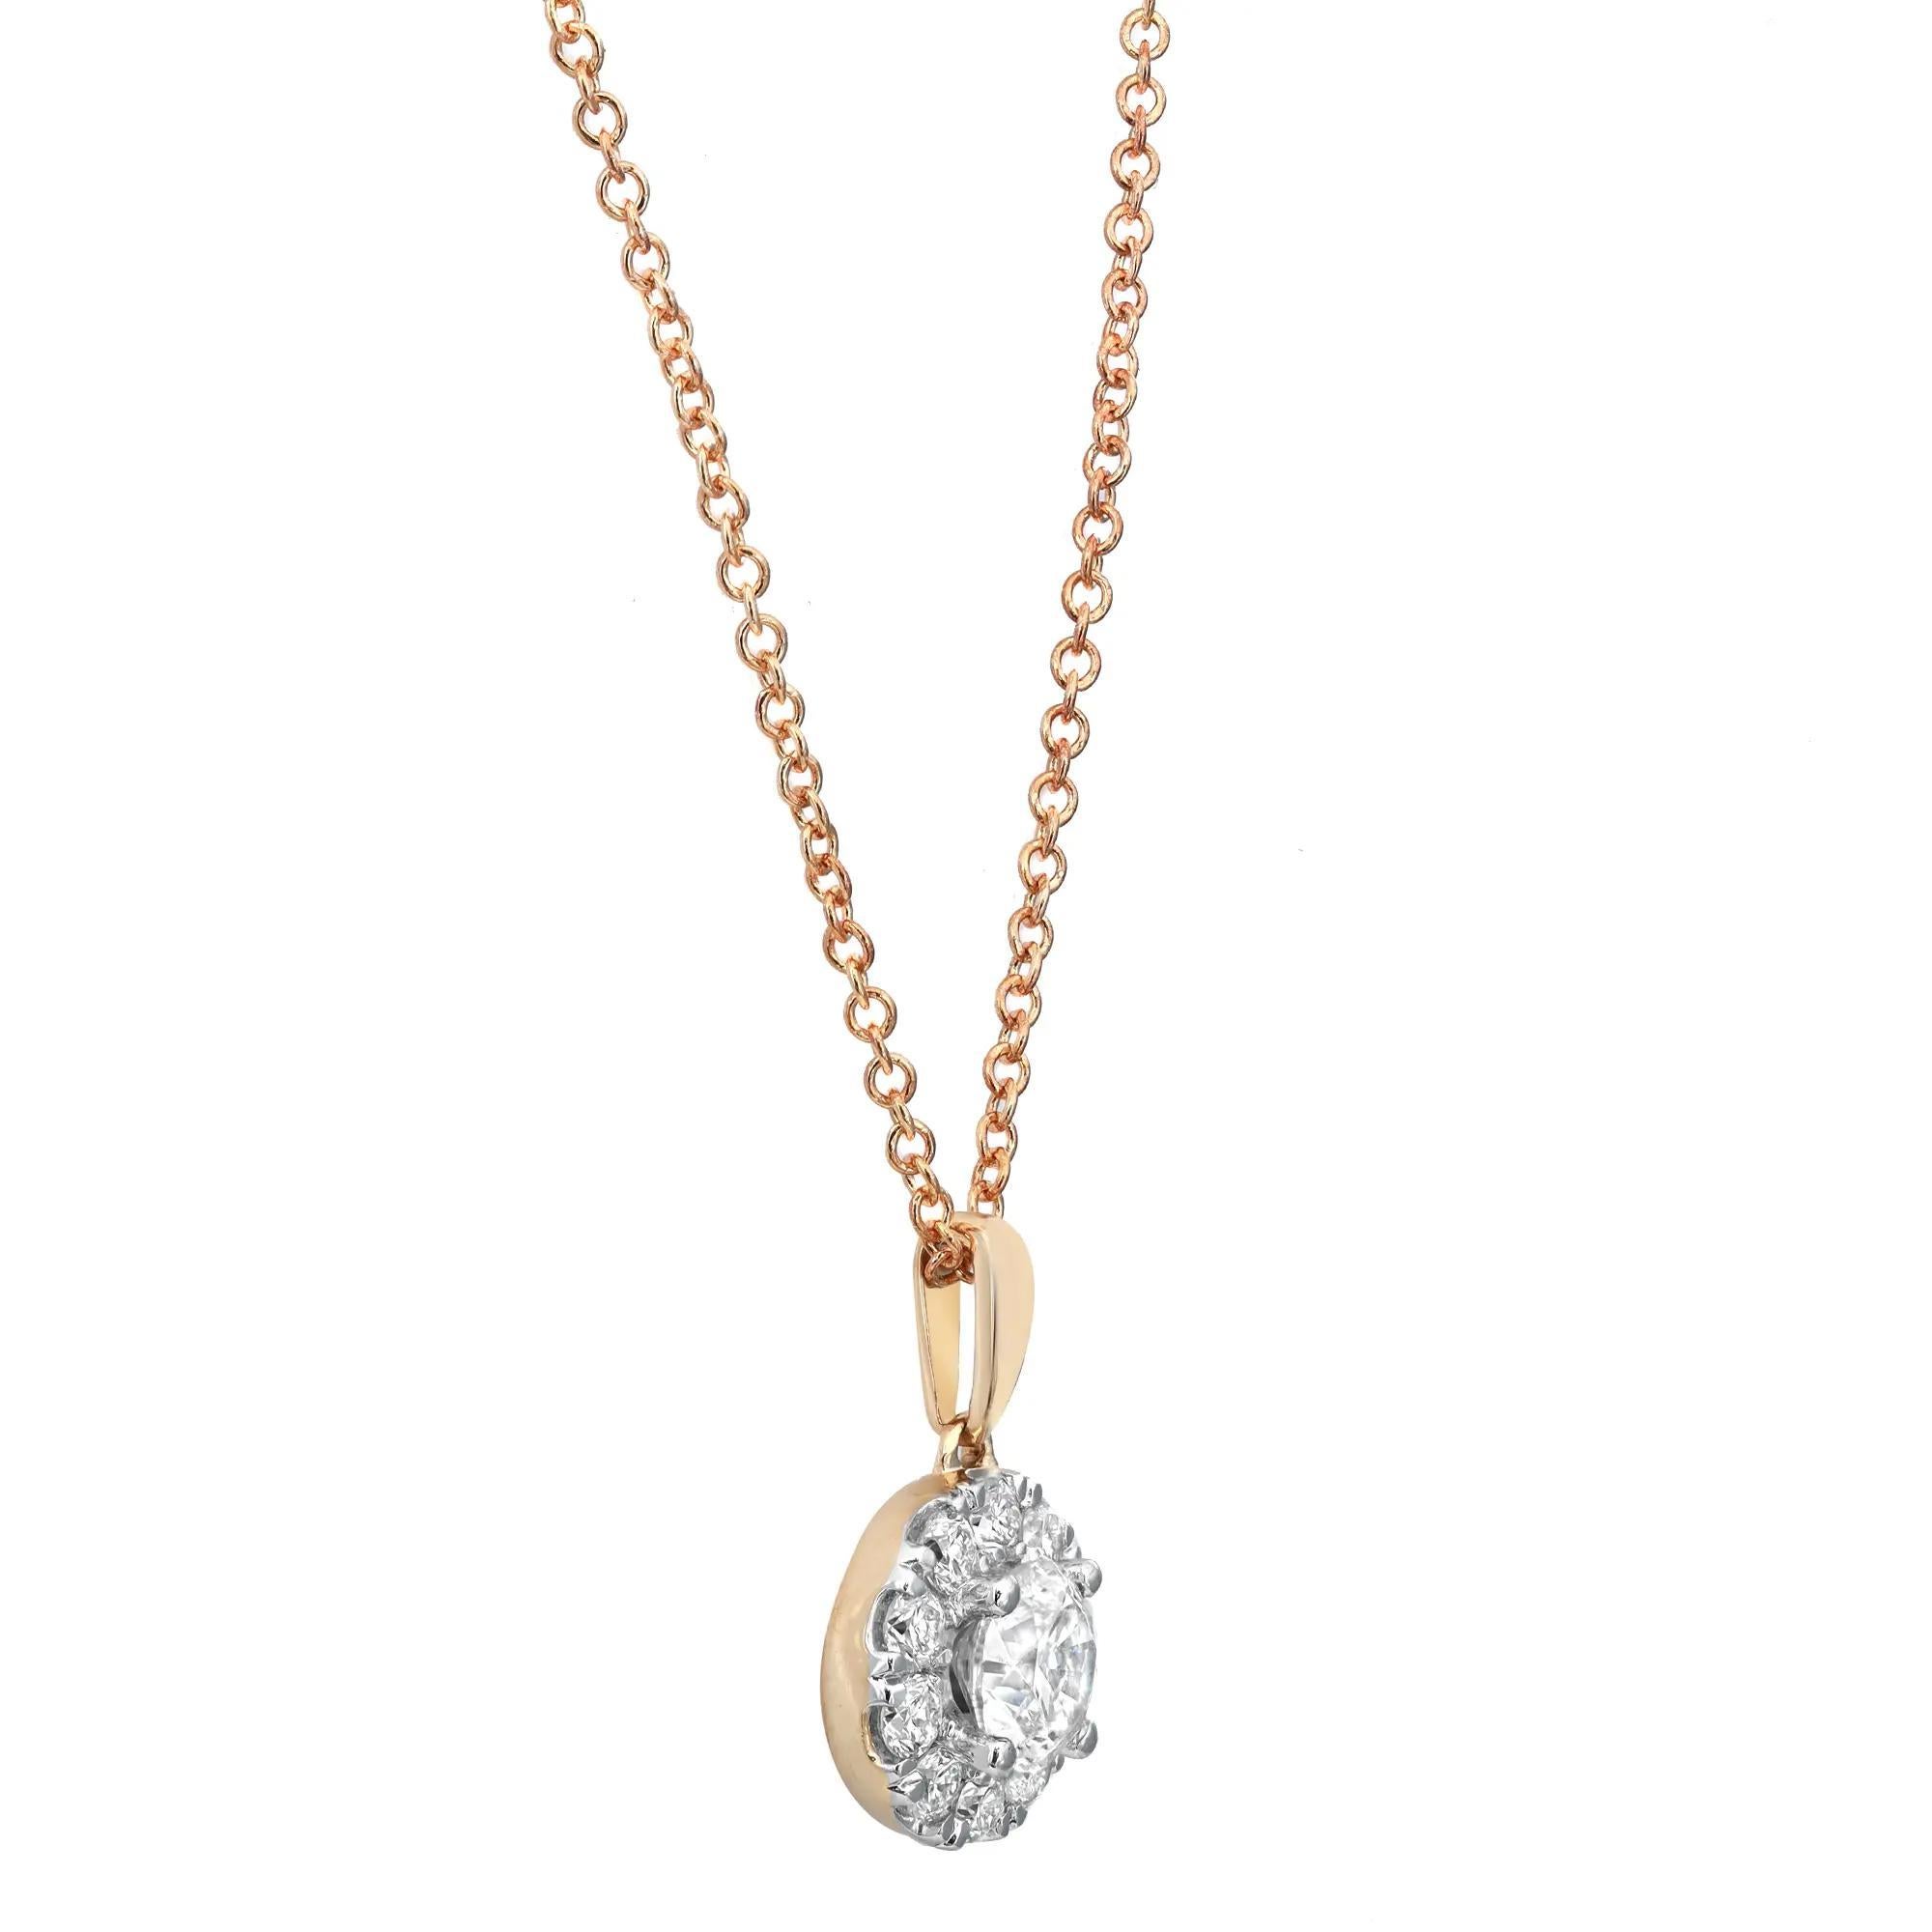 This beautiful diamond pendant necklace is a must have for your jewelry collection. Crafted in fine 14K yellow gold. It features a center prong set diamond weighing 0.50 carat with tiny diamonds in a halo setting giving an illusion of a bigger stone